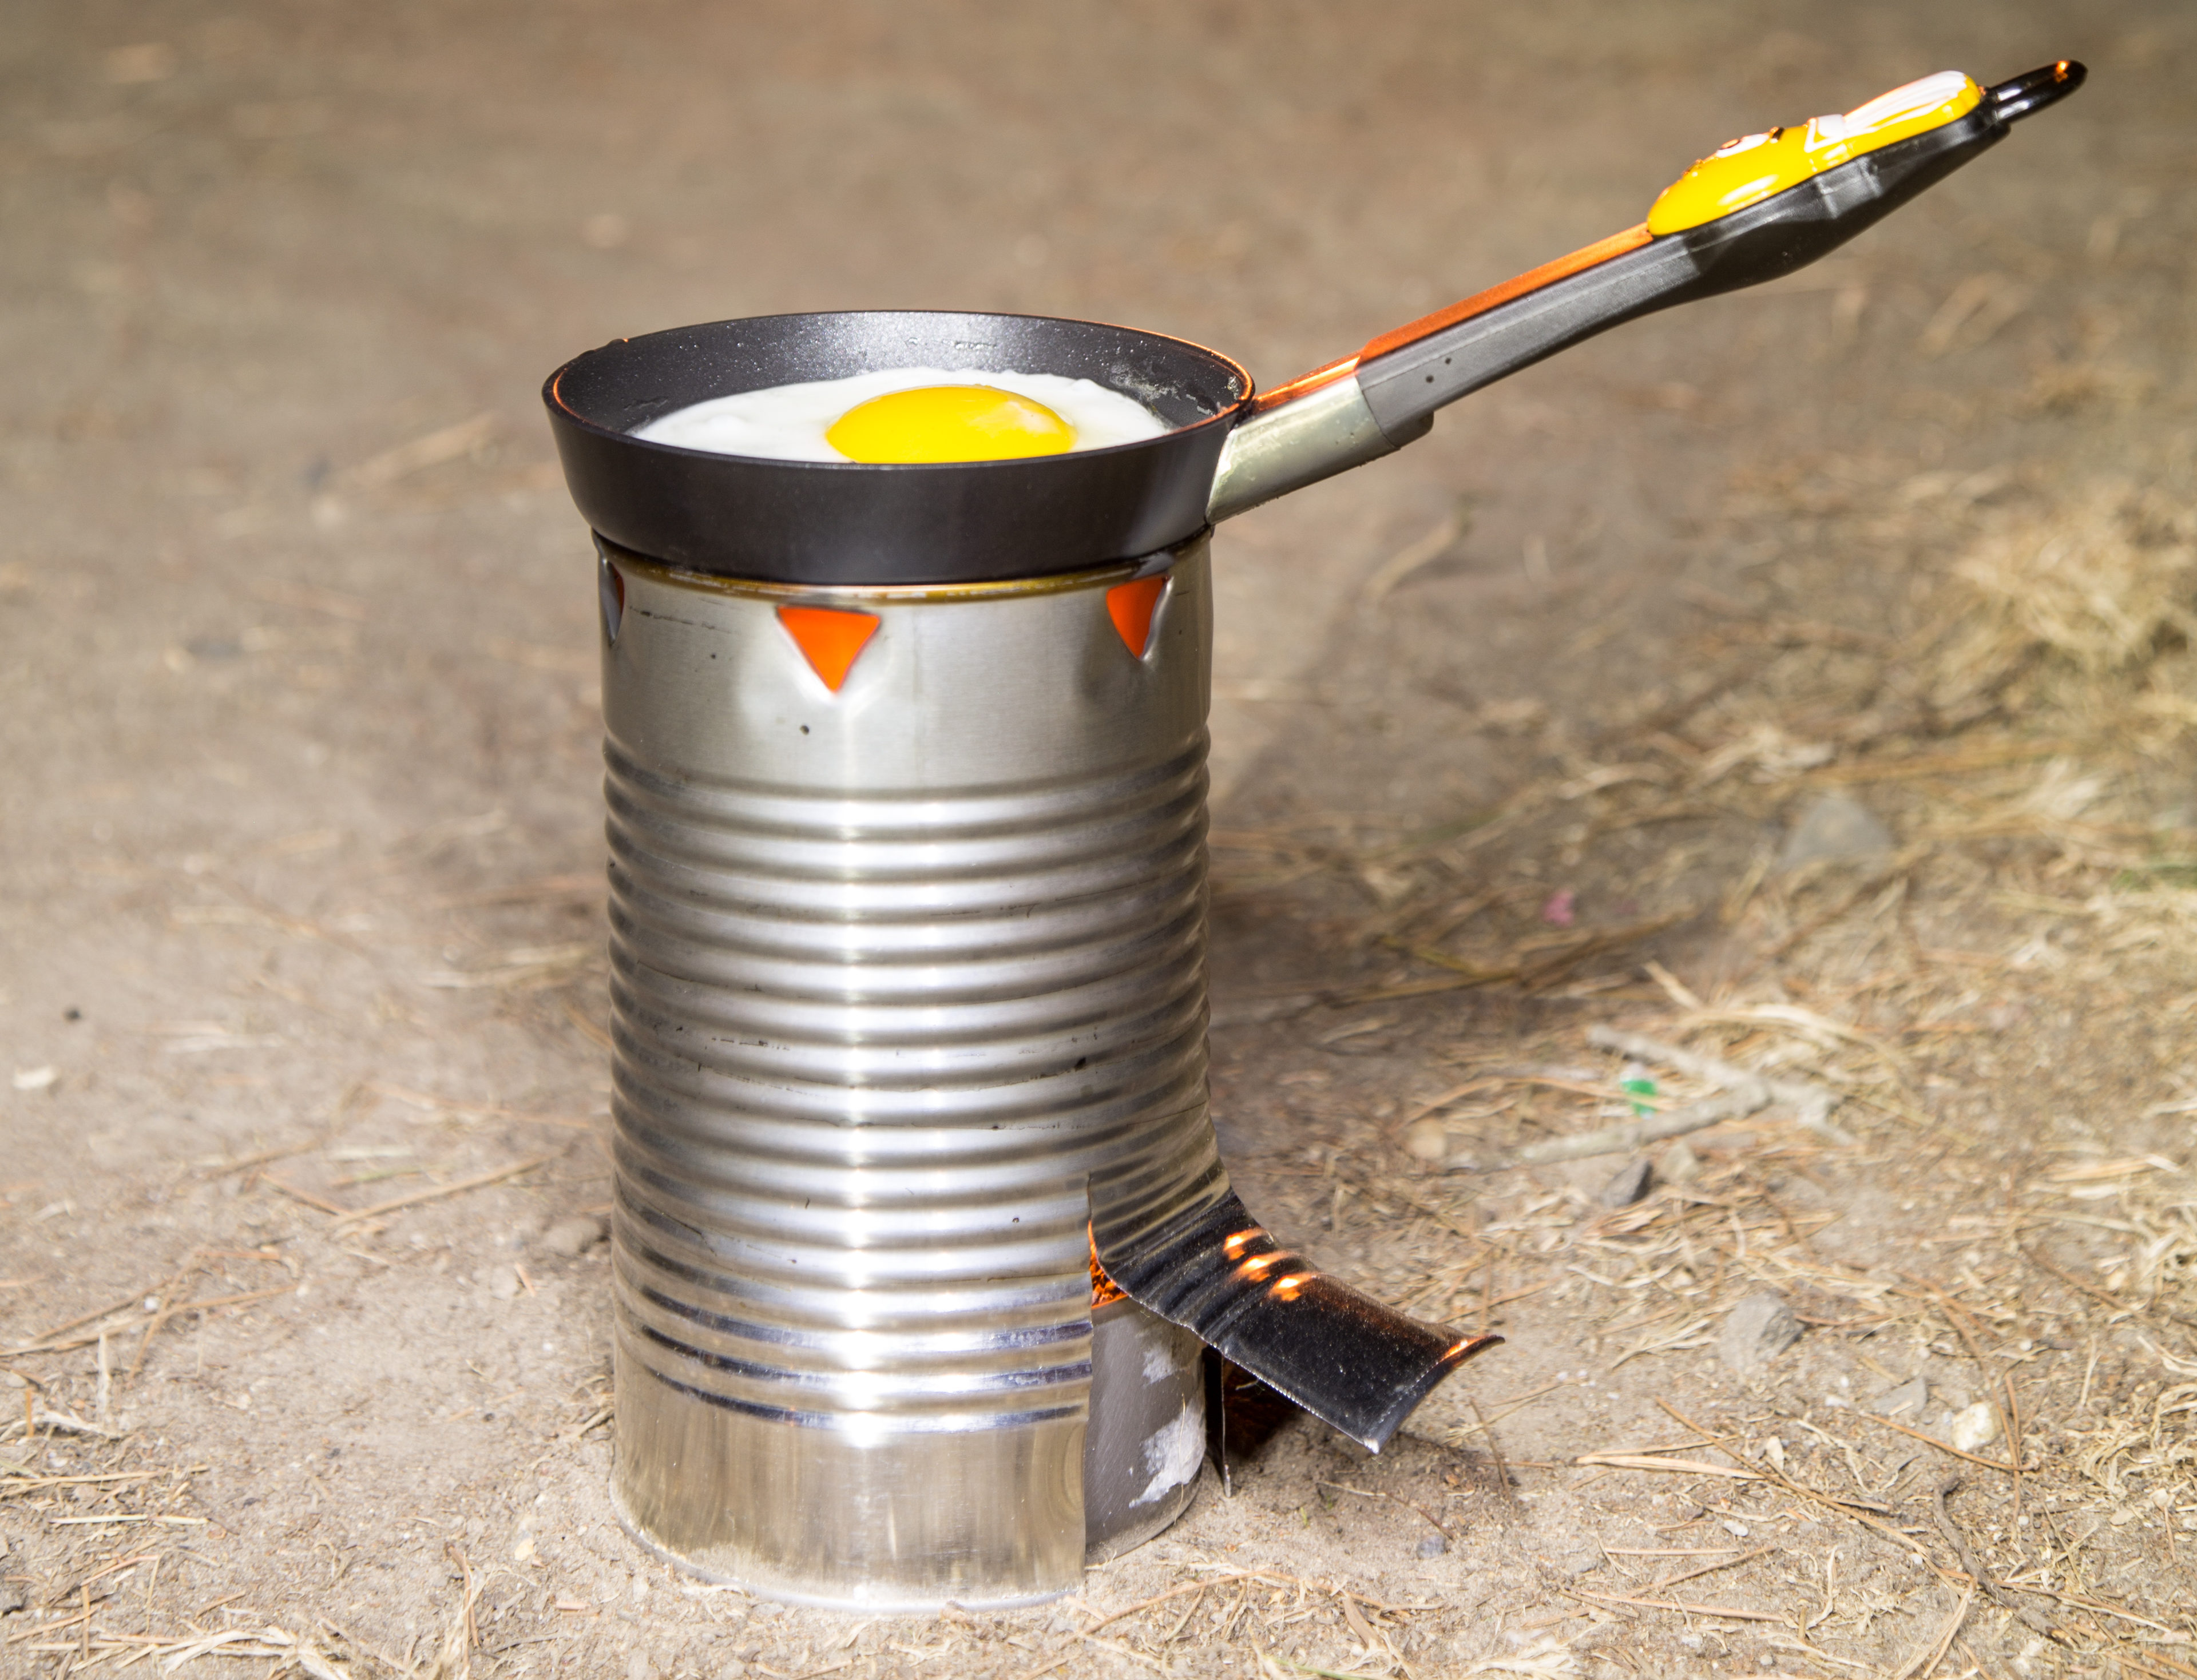 Build a Simple Camp Stove from a Tin Can - Make